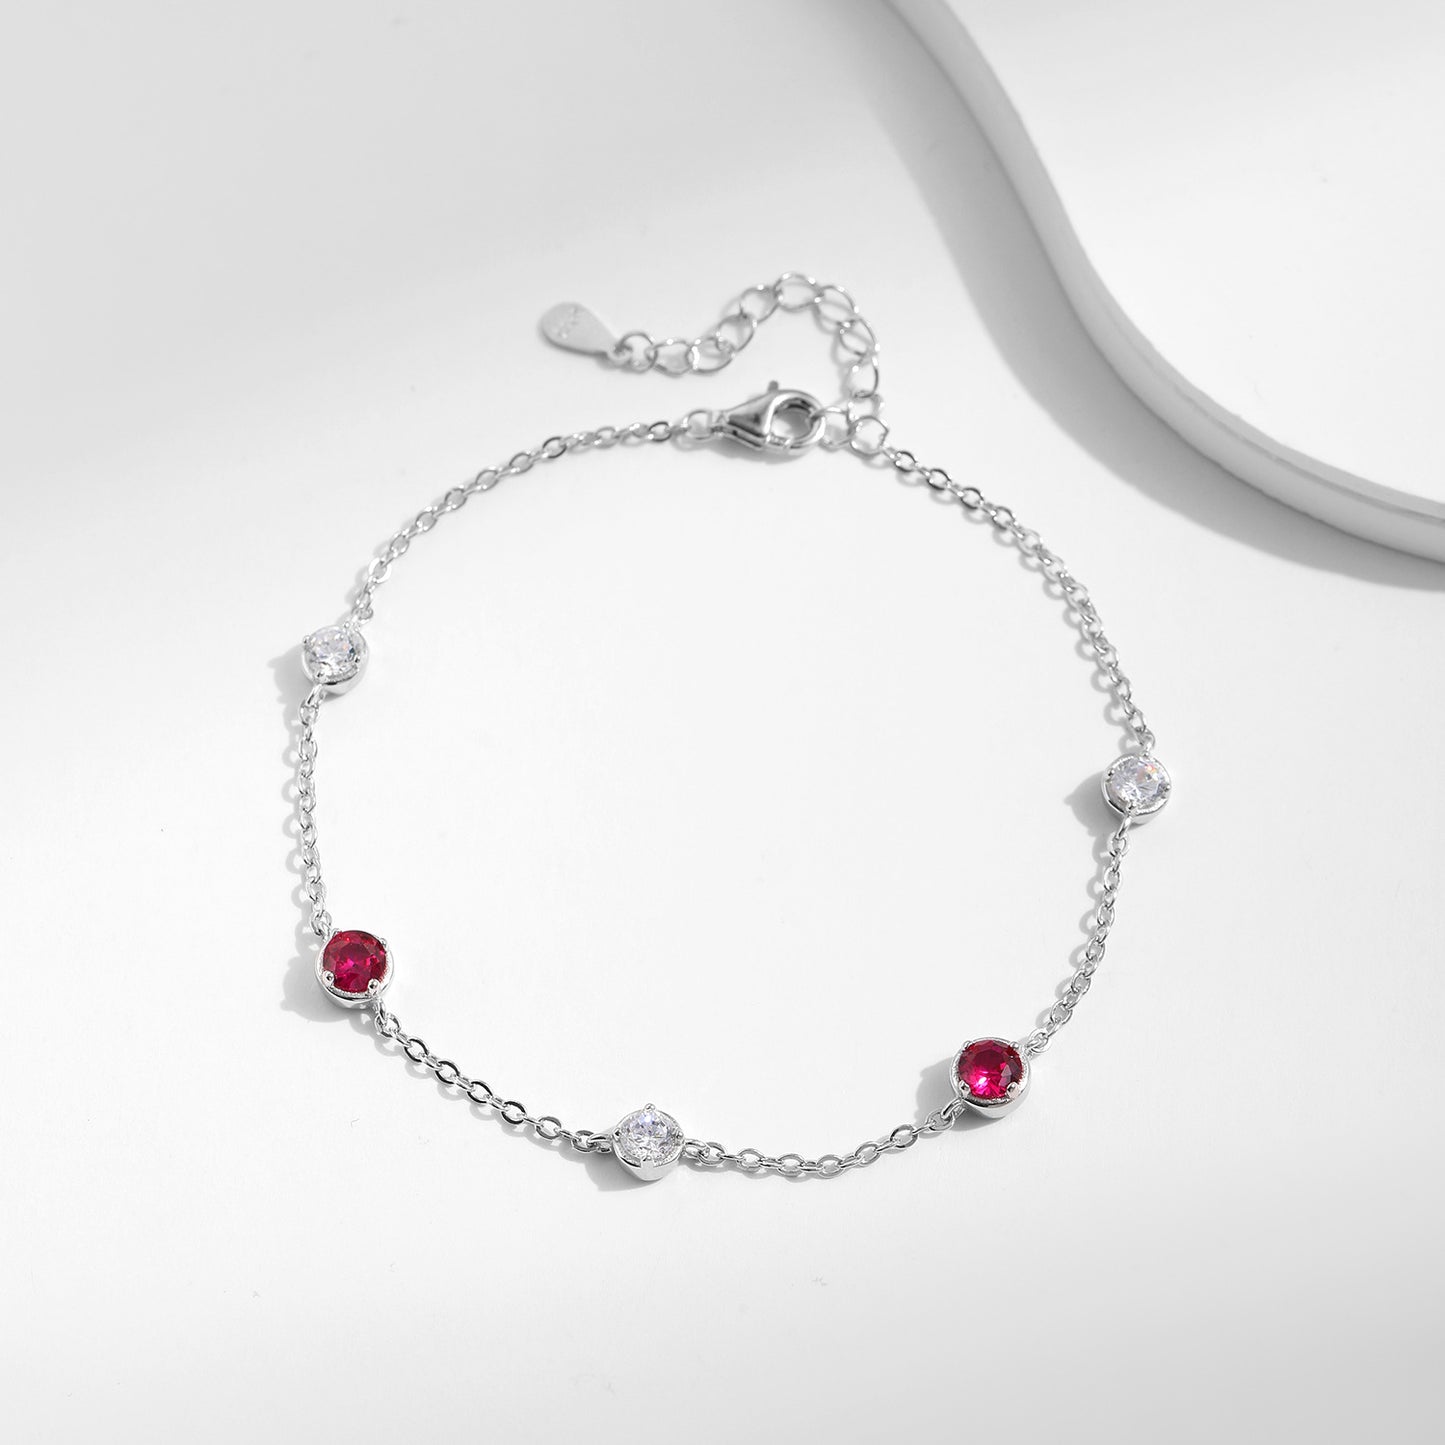 Exquisite Sterling Silver Ins Style Bracelet with Zircon Gems